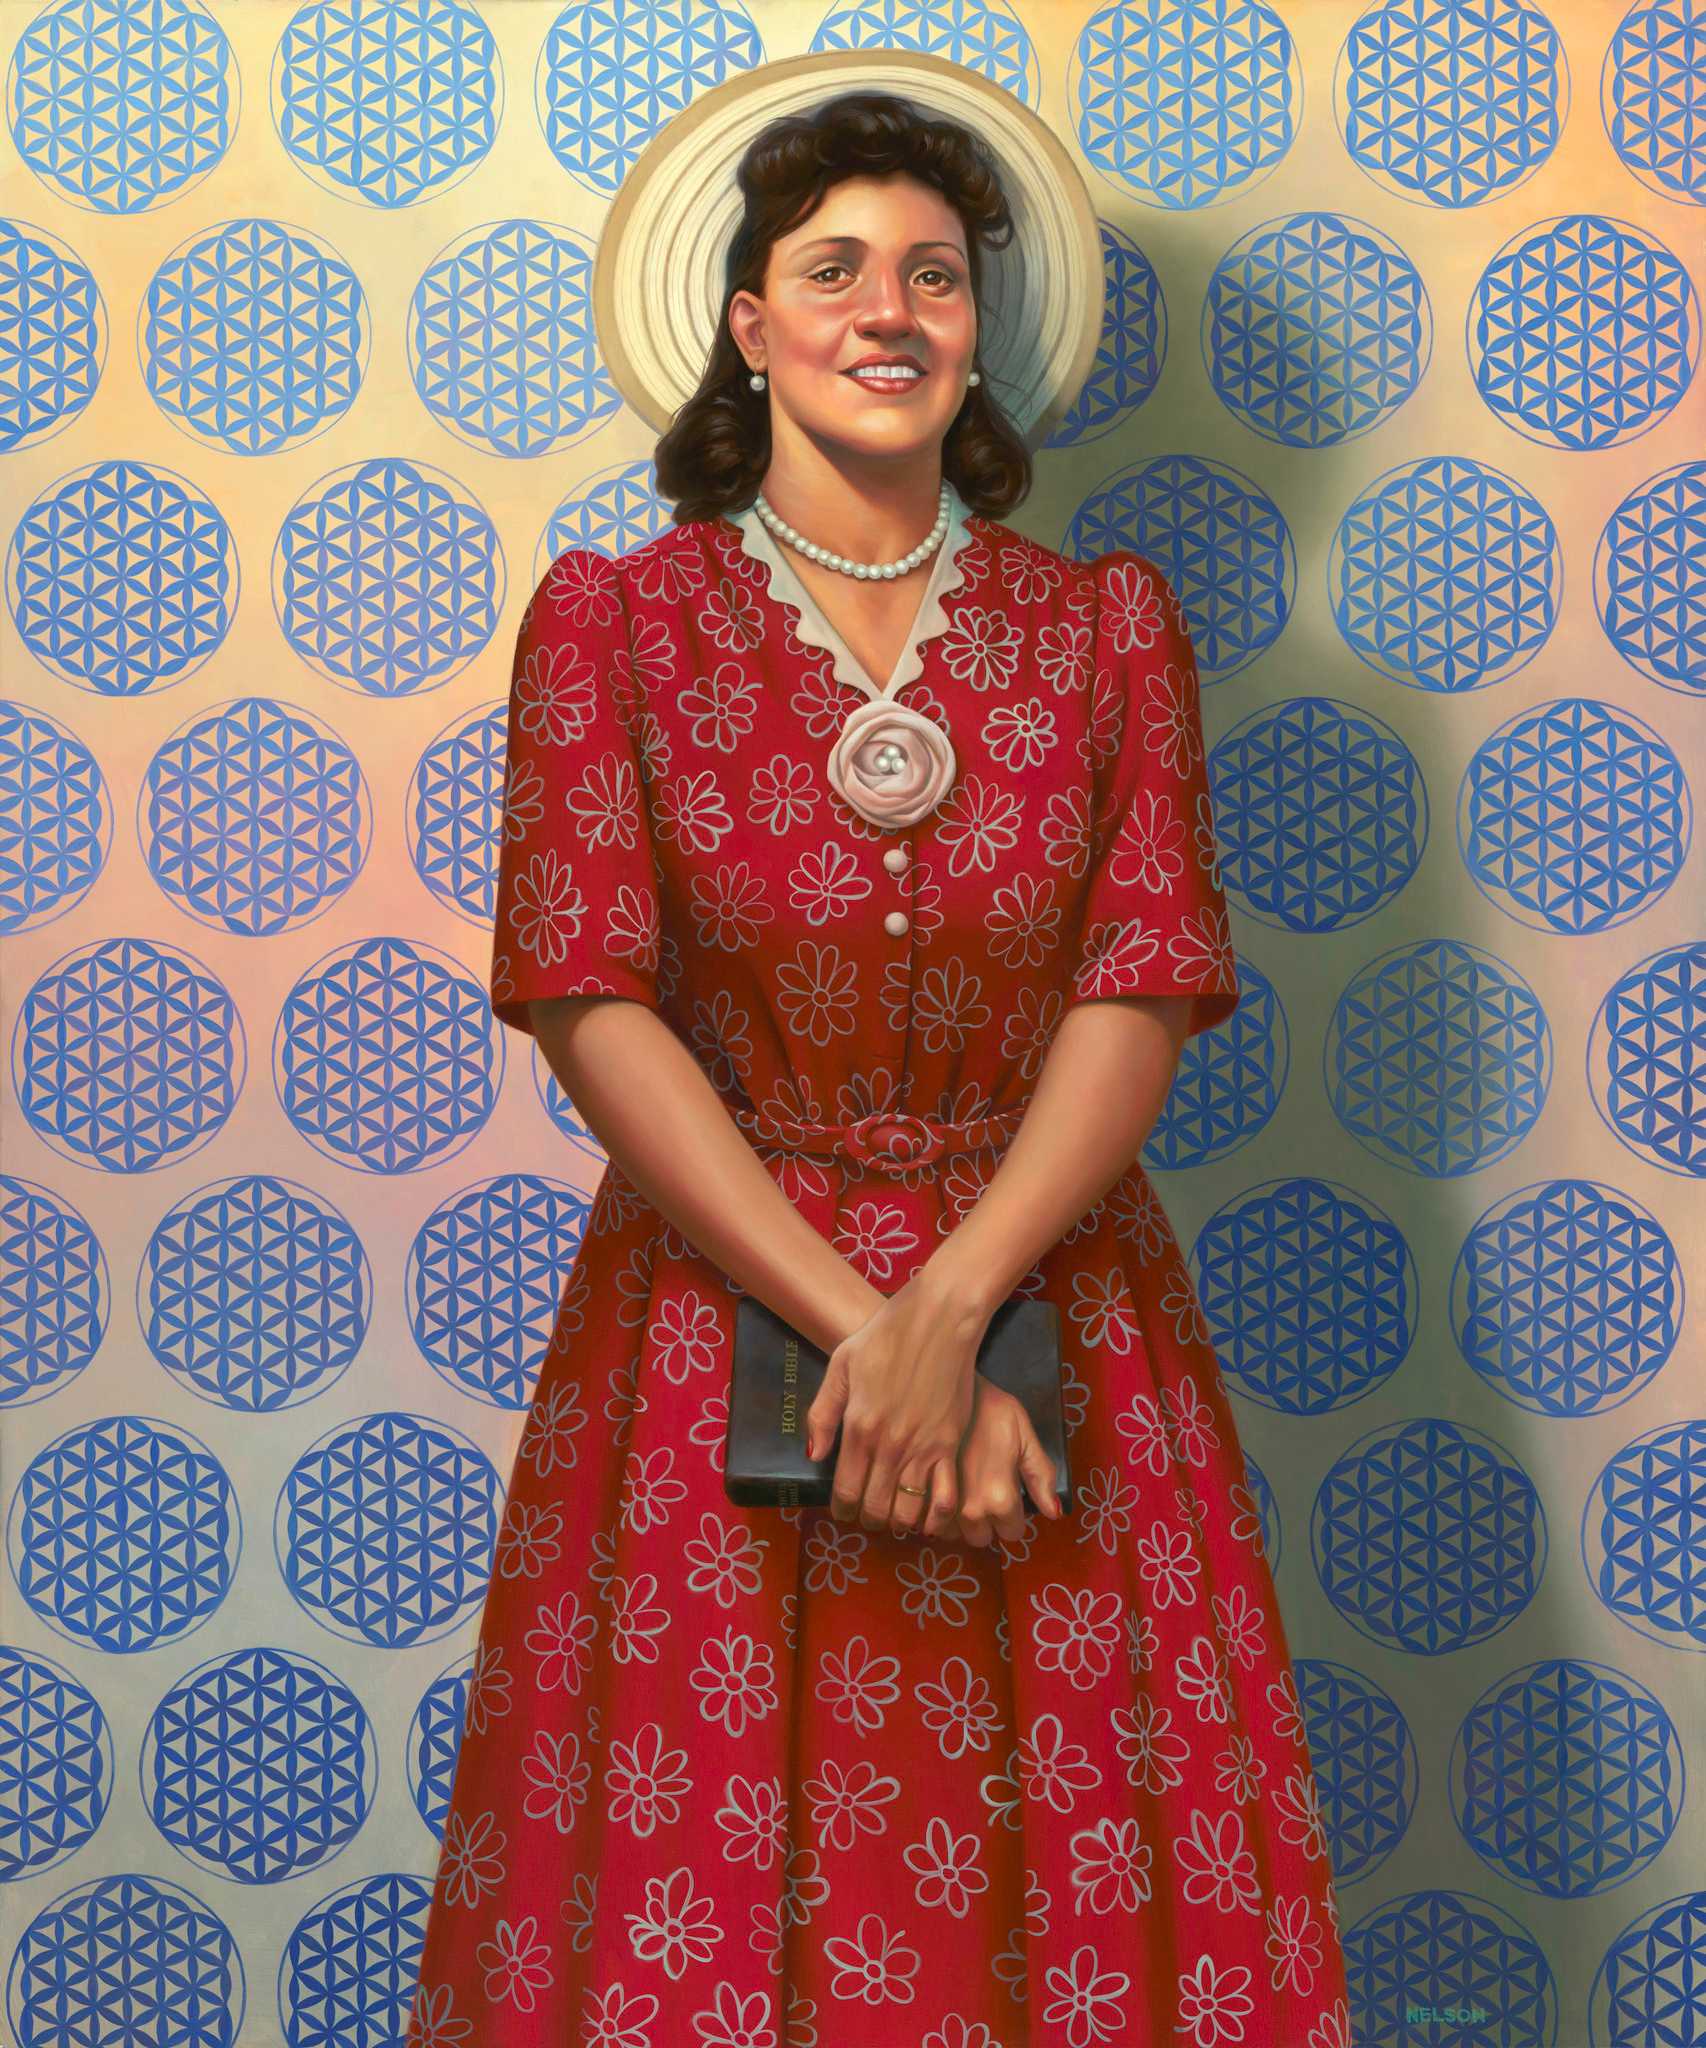 Oil painting of Henrietta Lacks by Kadir Nelson. Lacks, smiling, is depicted standing in the center of the image. She is facing forward with her hands clasped in front of her body, holding a black book with gold-colored text [HOLY BIBLE]. Lacks is wearing a red dress with a white flower pattern and small belt. The dress has central buttons, with two (2) missing. There is a flower accessory with three (3) pearls in the center above the buttons. Lacks is wearing a wedding ring and a pearl necklaces and earrings. She has a cream and tan hat, the circular brim of which acts like a halo behind her head. Lacks is standing in front of a cream wall with a blue geometric "Flower of Life" motif. The work is signed in the lower right.